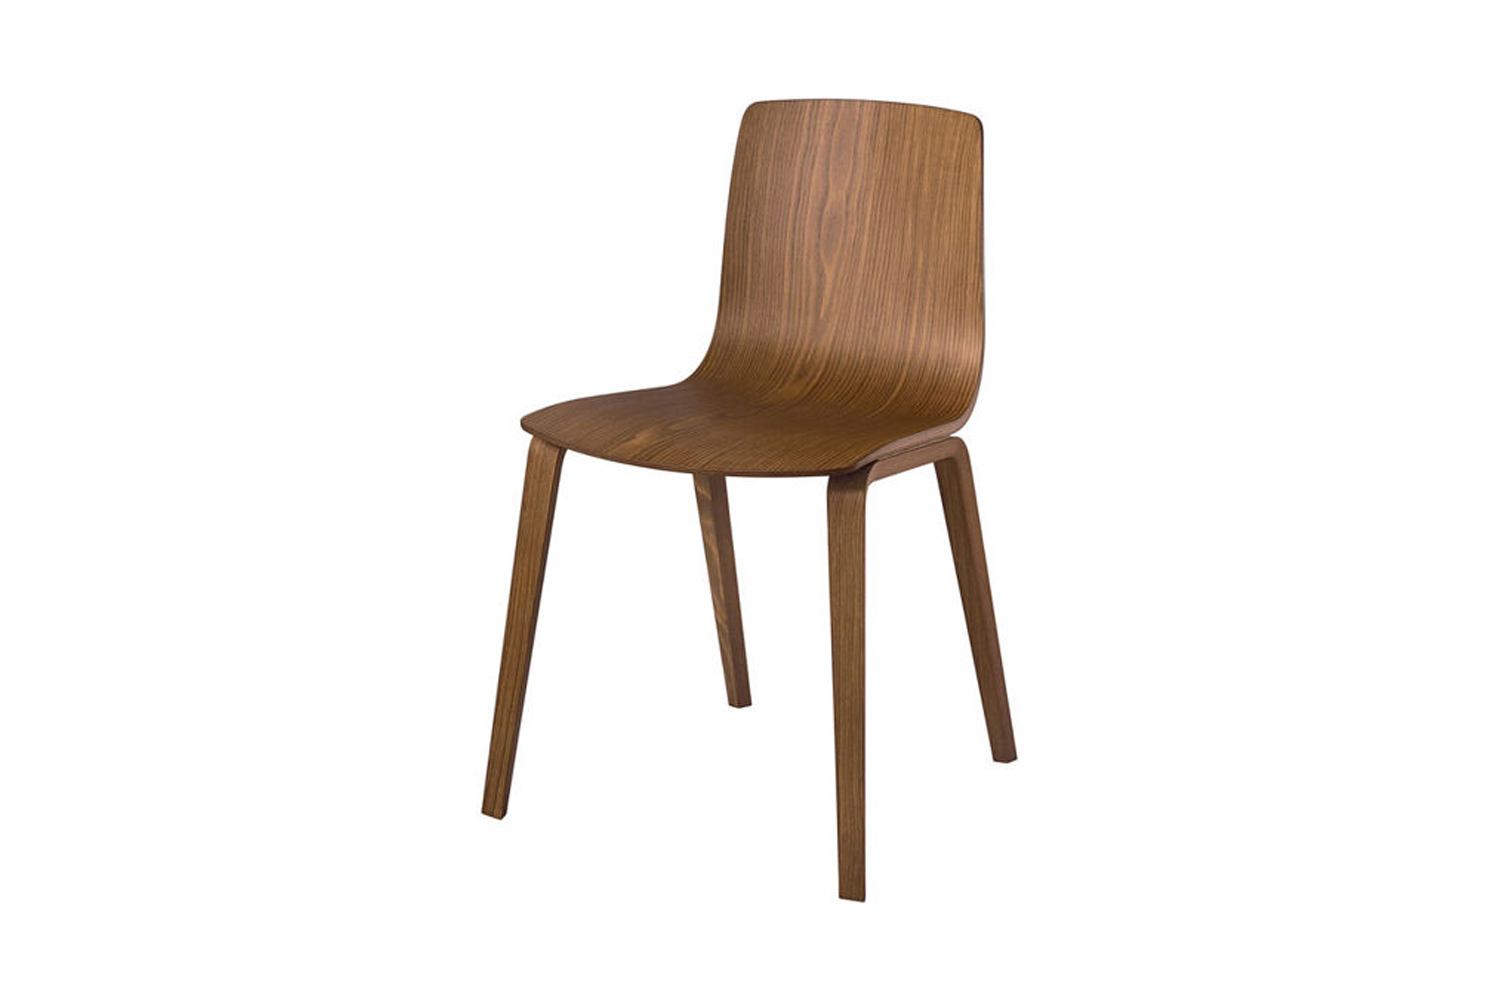 the arper aava wood chair is \$60\1.80 at hive. 15